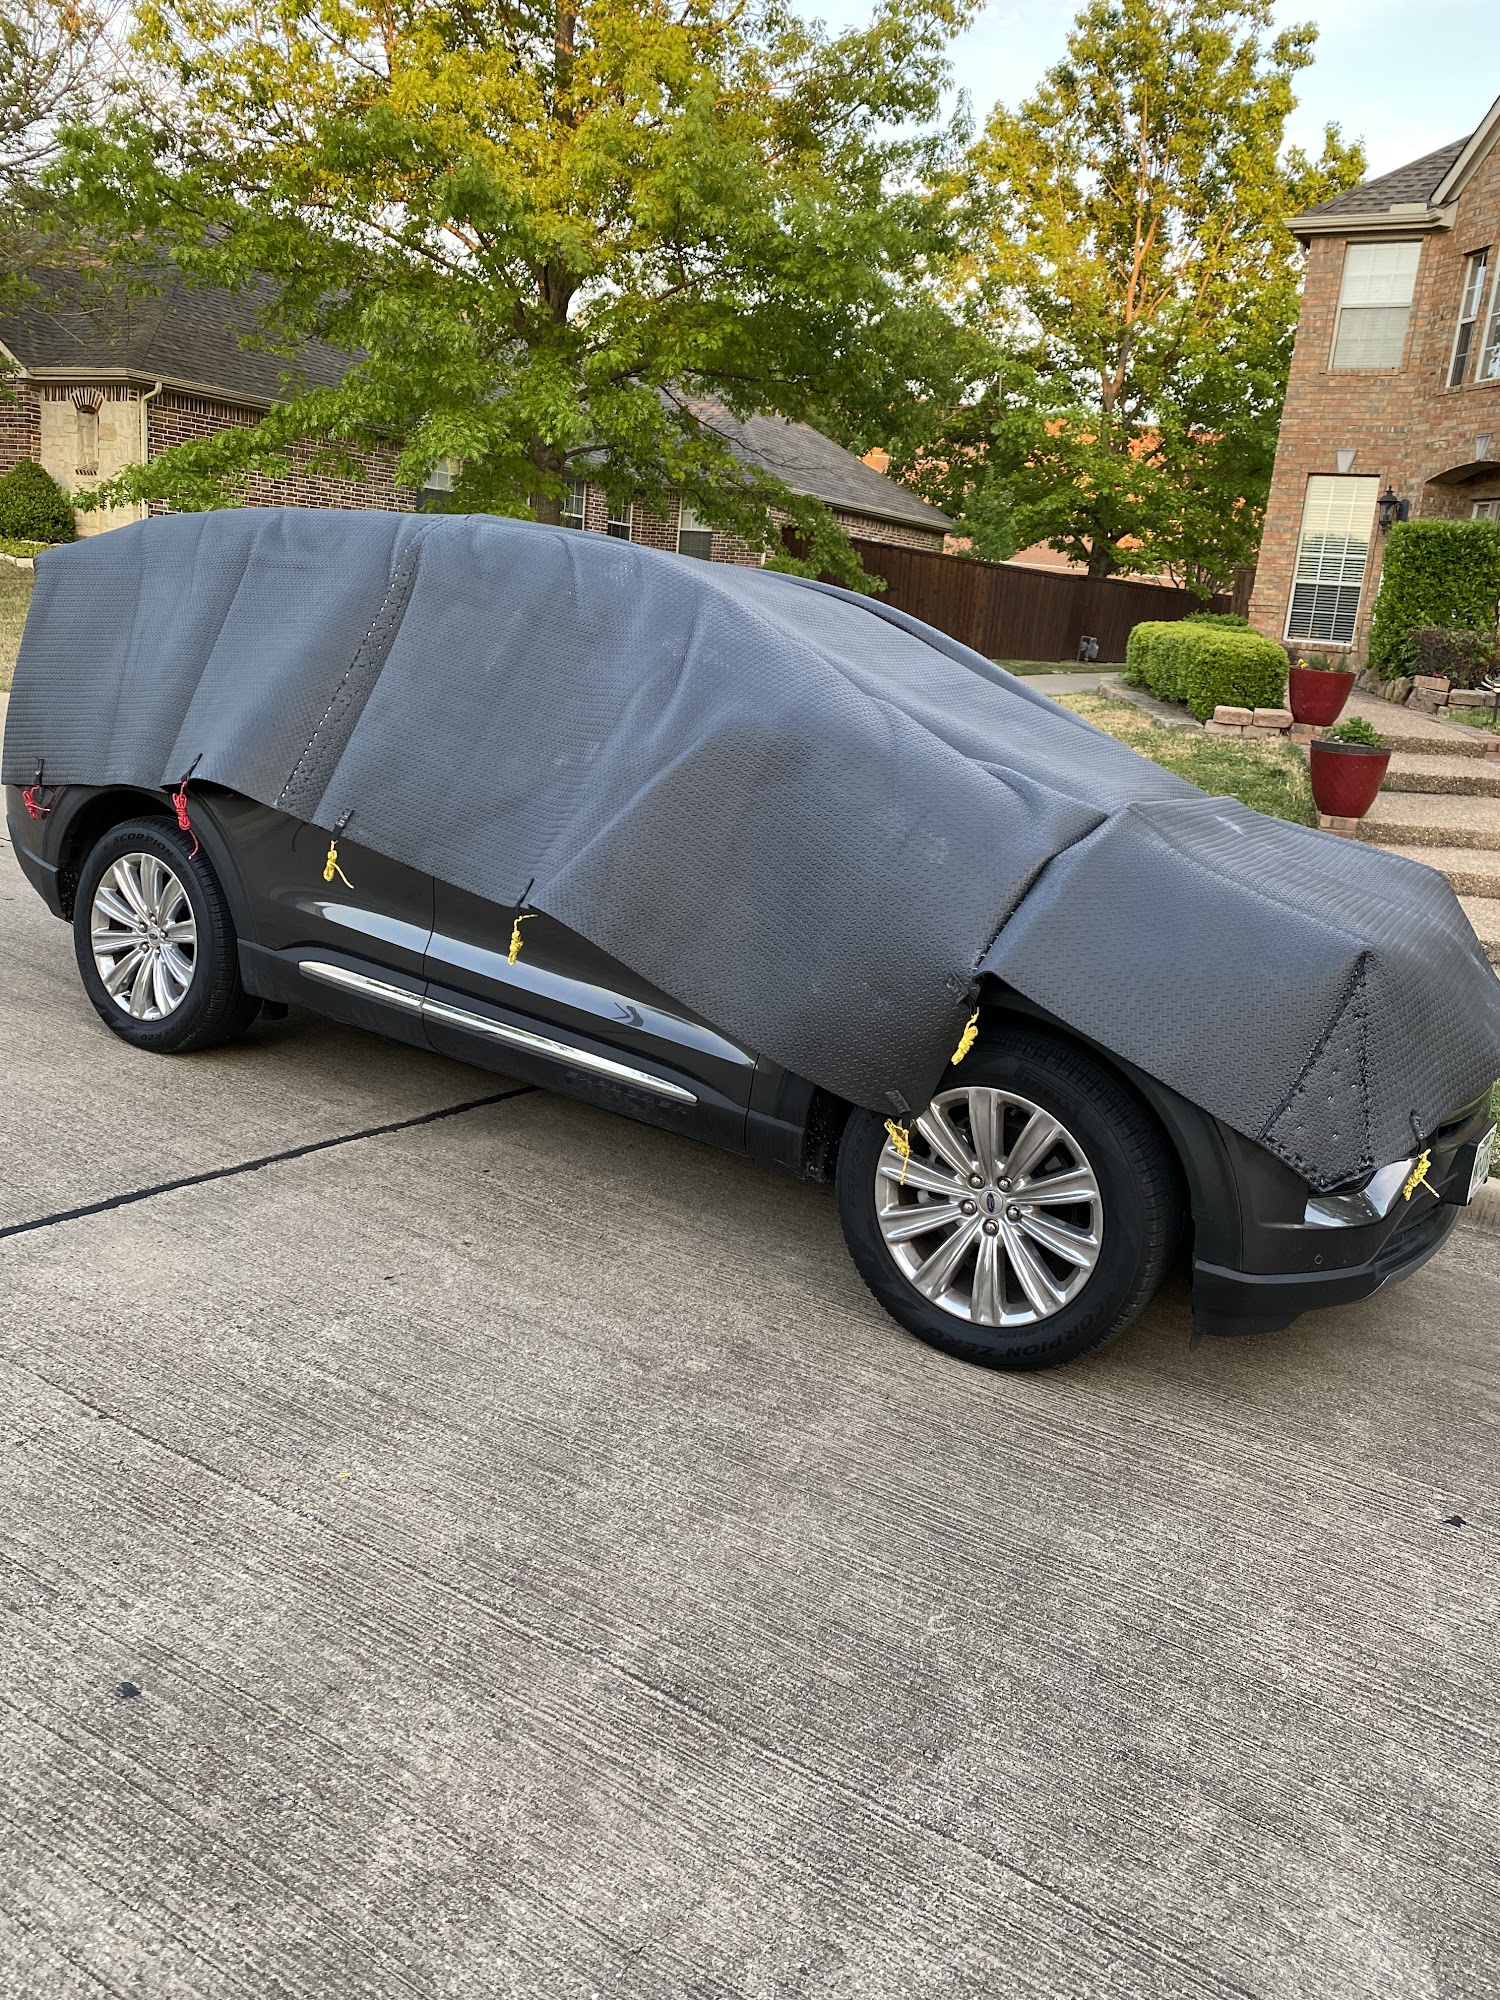 The Car Armor hail protection covers